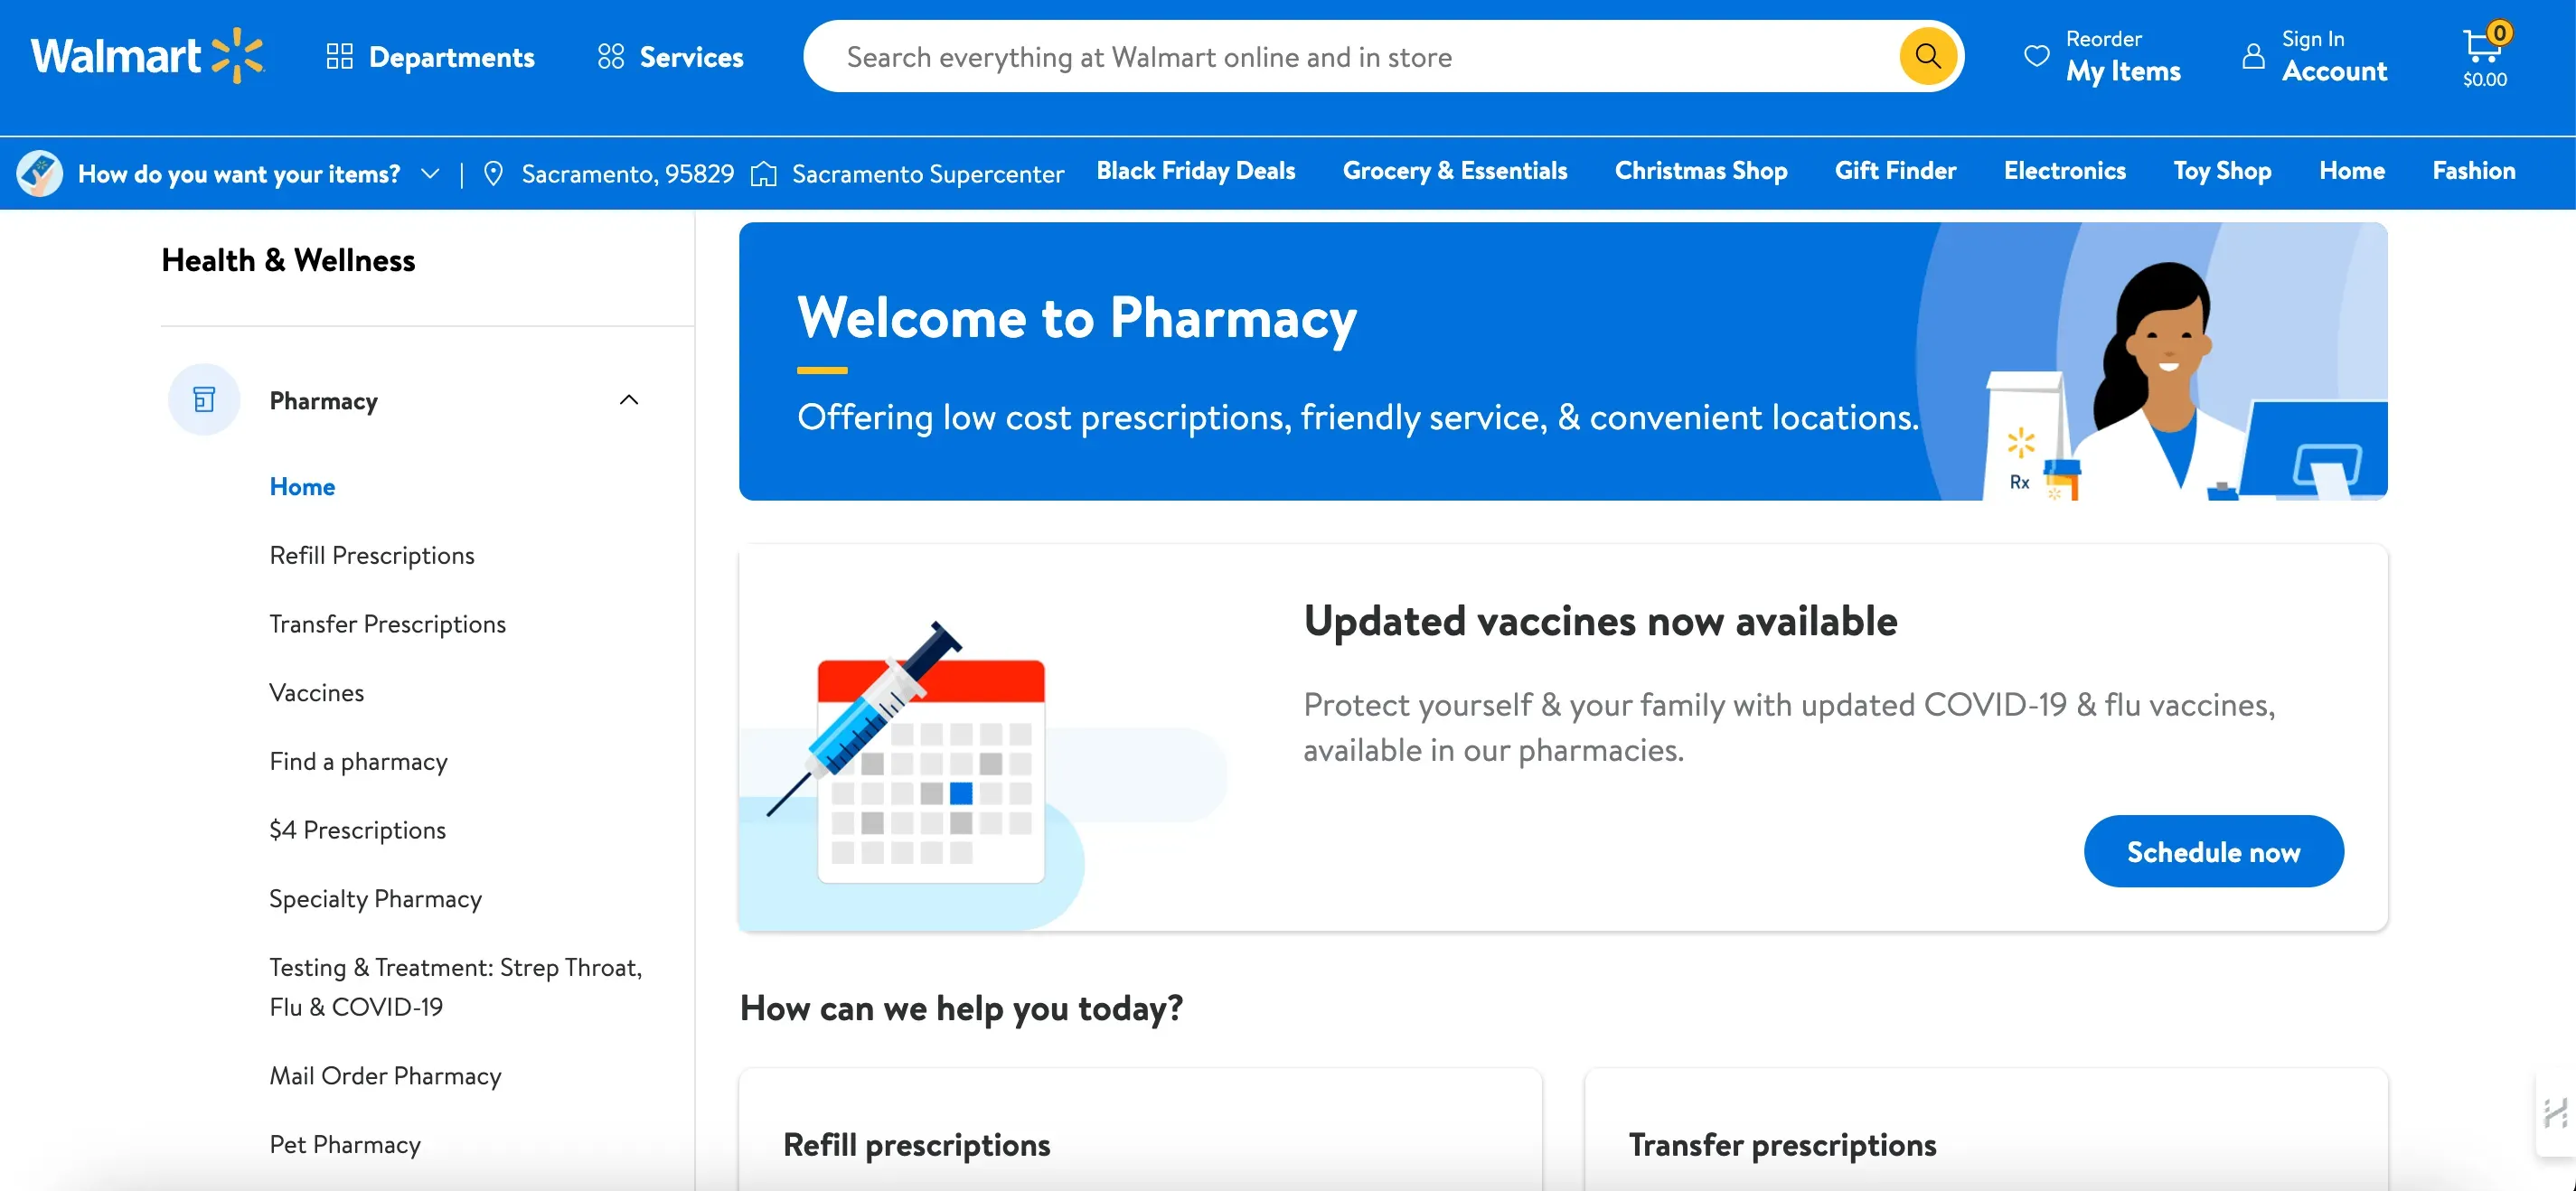 Why does it pay to Use Walmart Pharmacy Online?